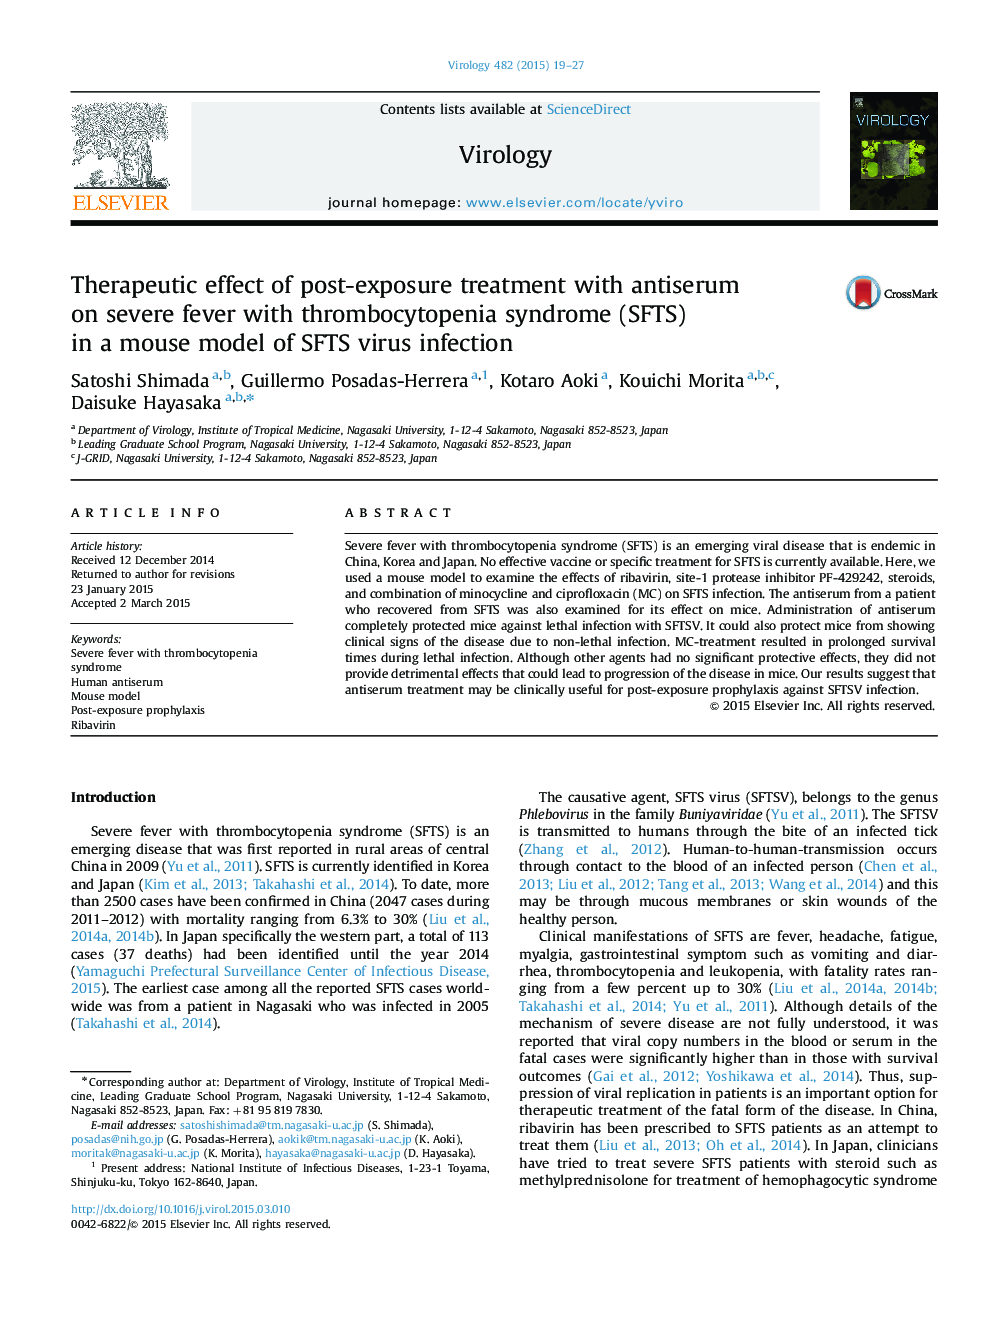 Therapeutic effect of post-exposure treatment with antiserum on severe fever with thrombocytopenia syndrome (SFTS) in a mouse model of SFTS virus infection